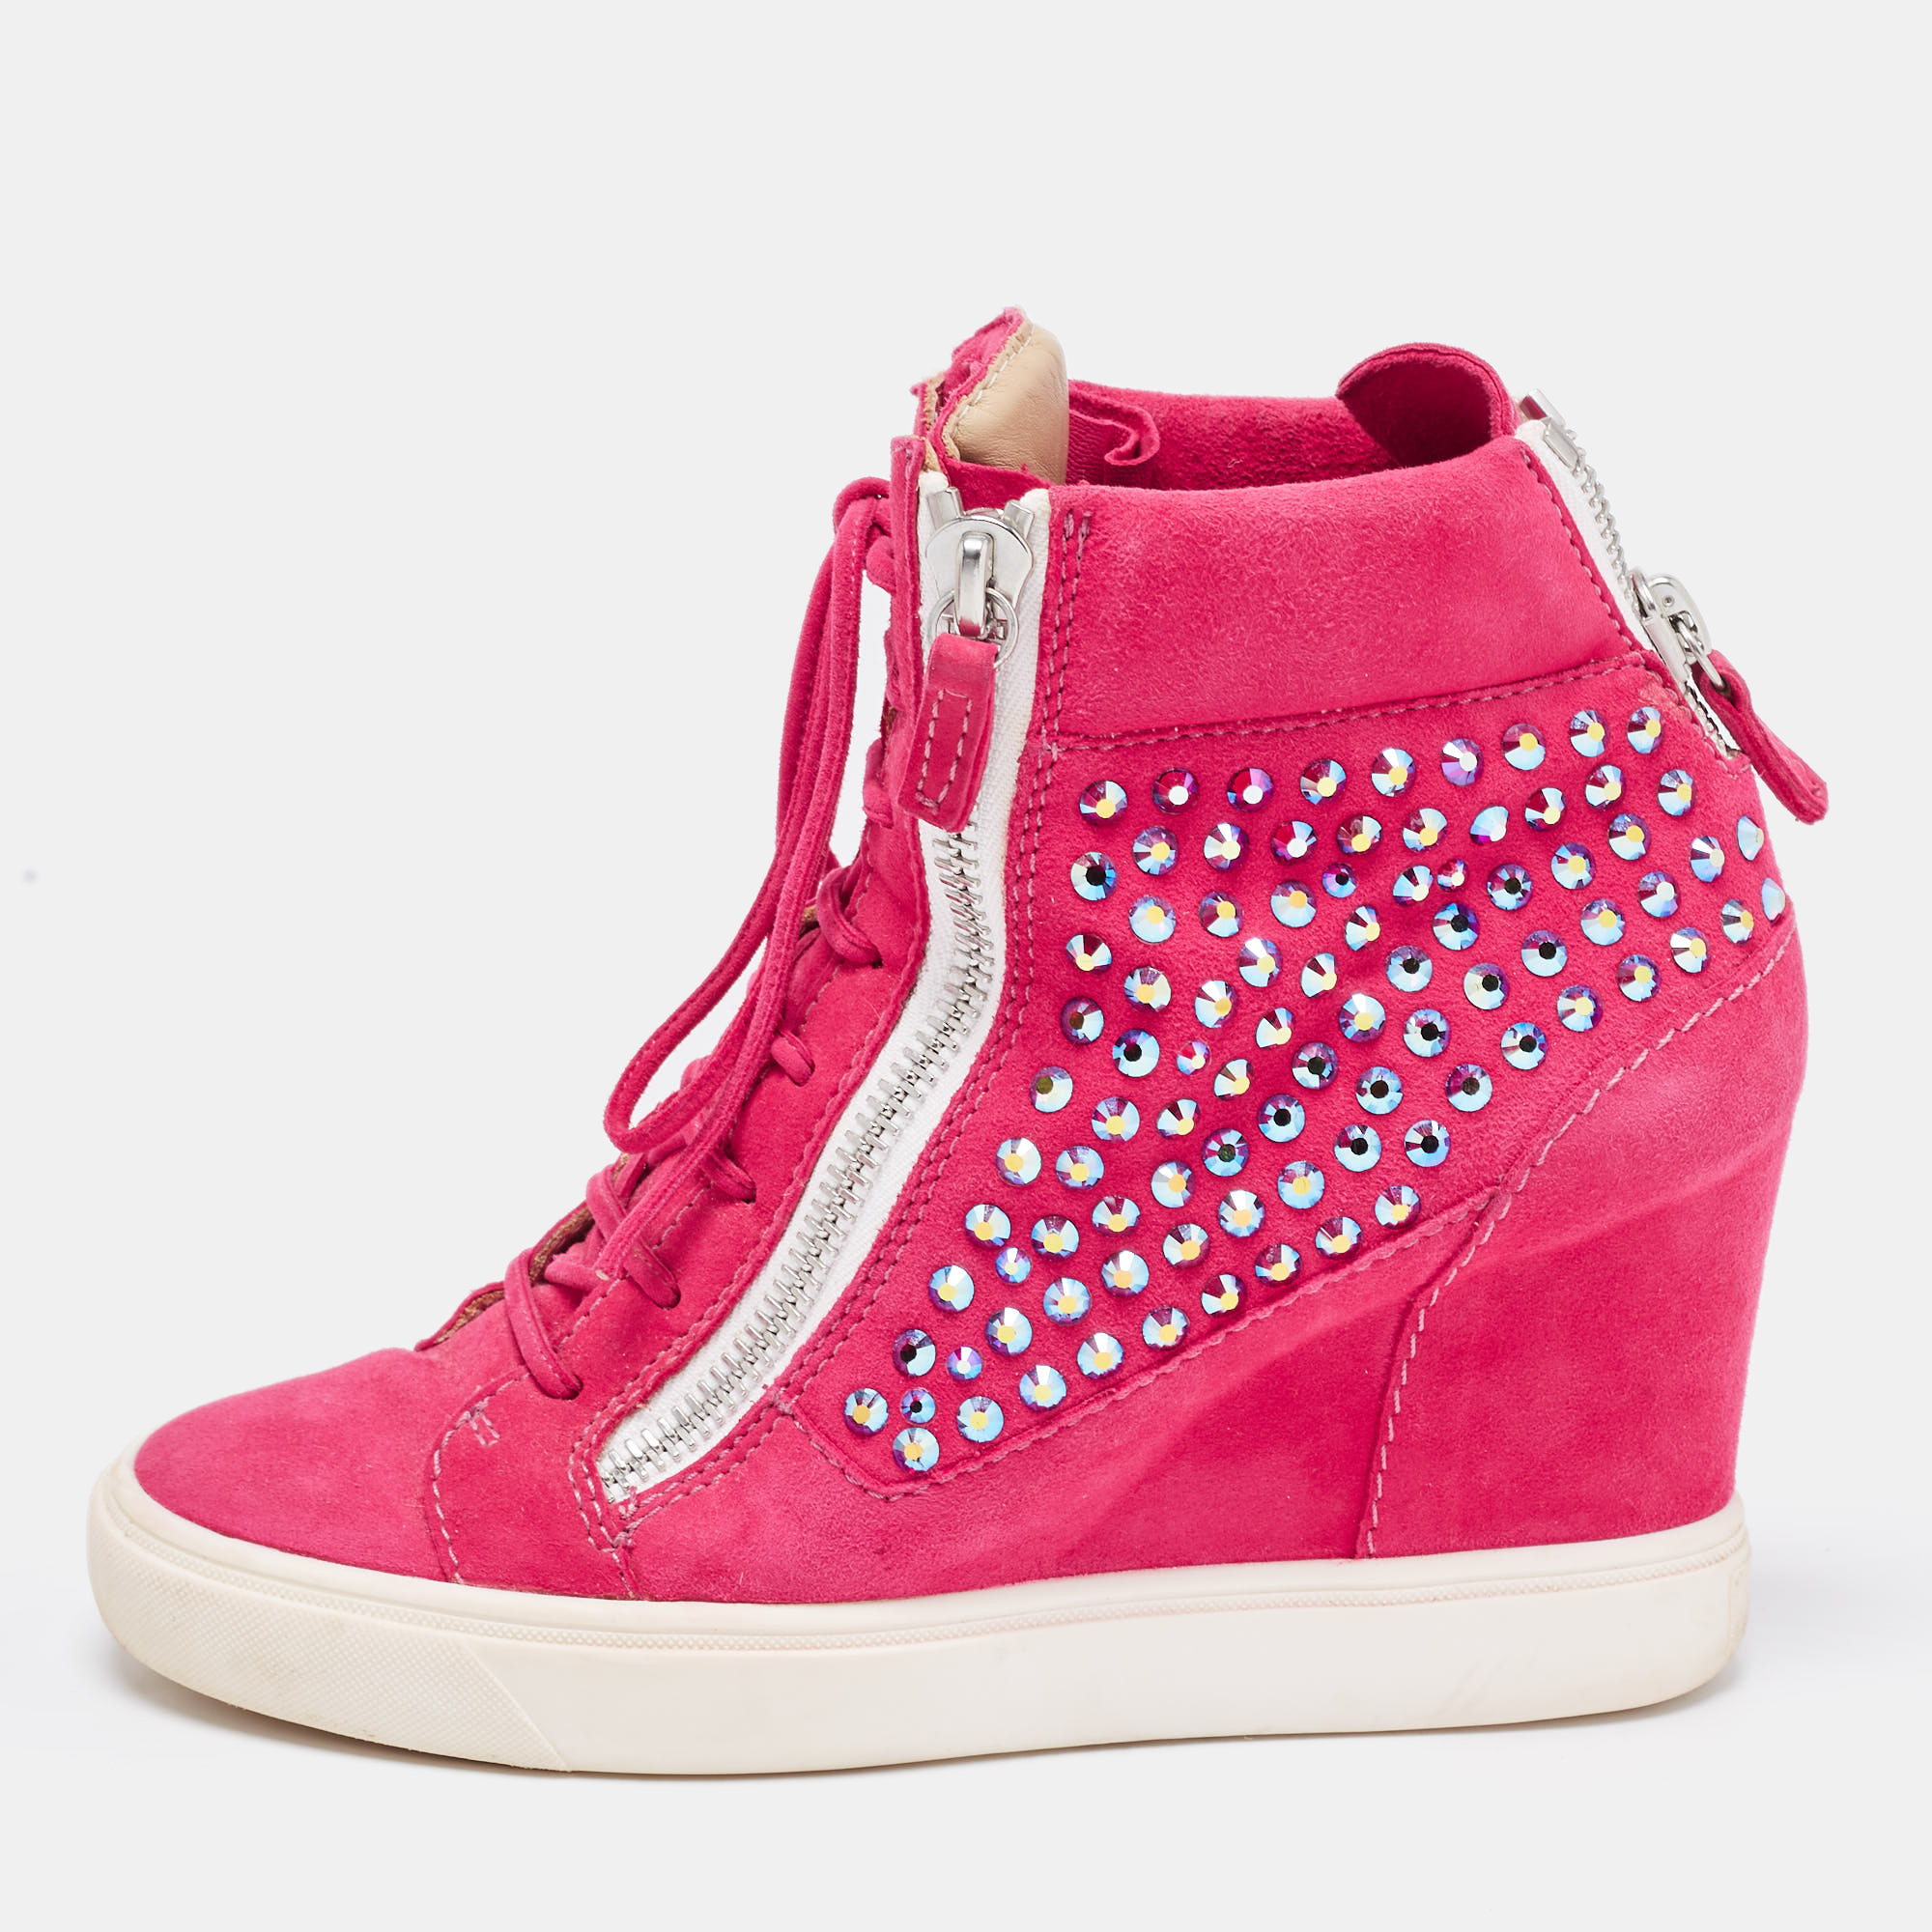 Giuseppe zanotti pink suede crystal embellished wedge sneakers size 39